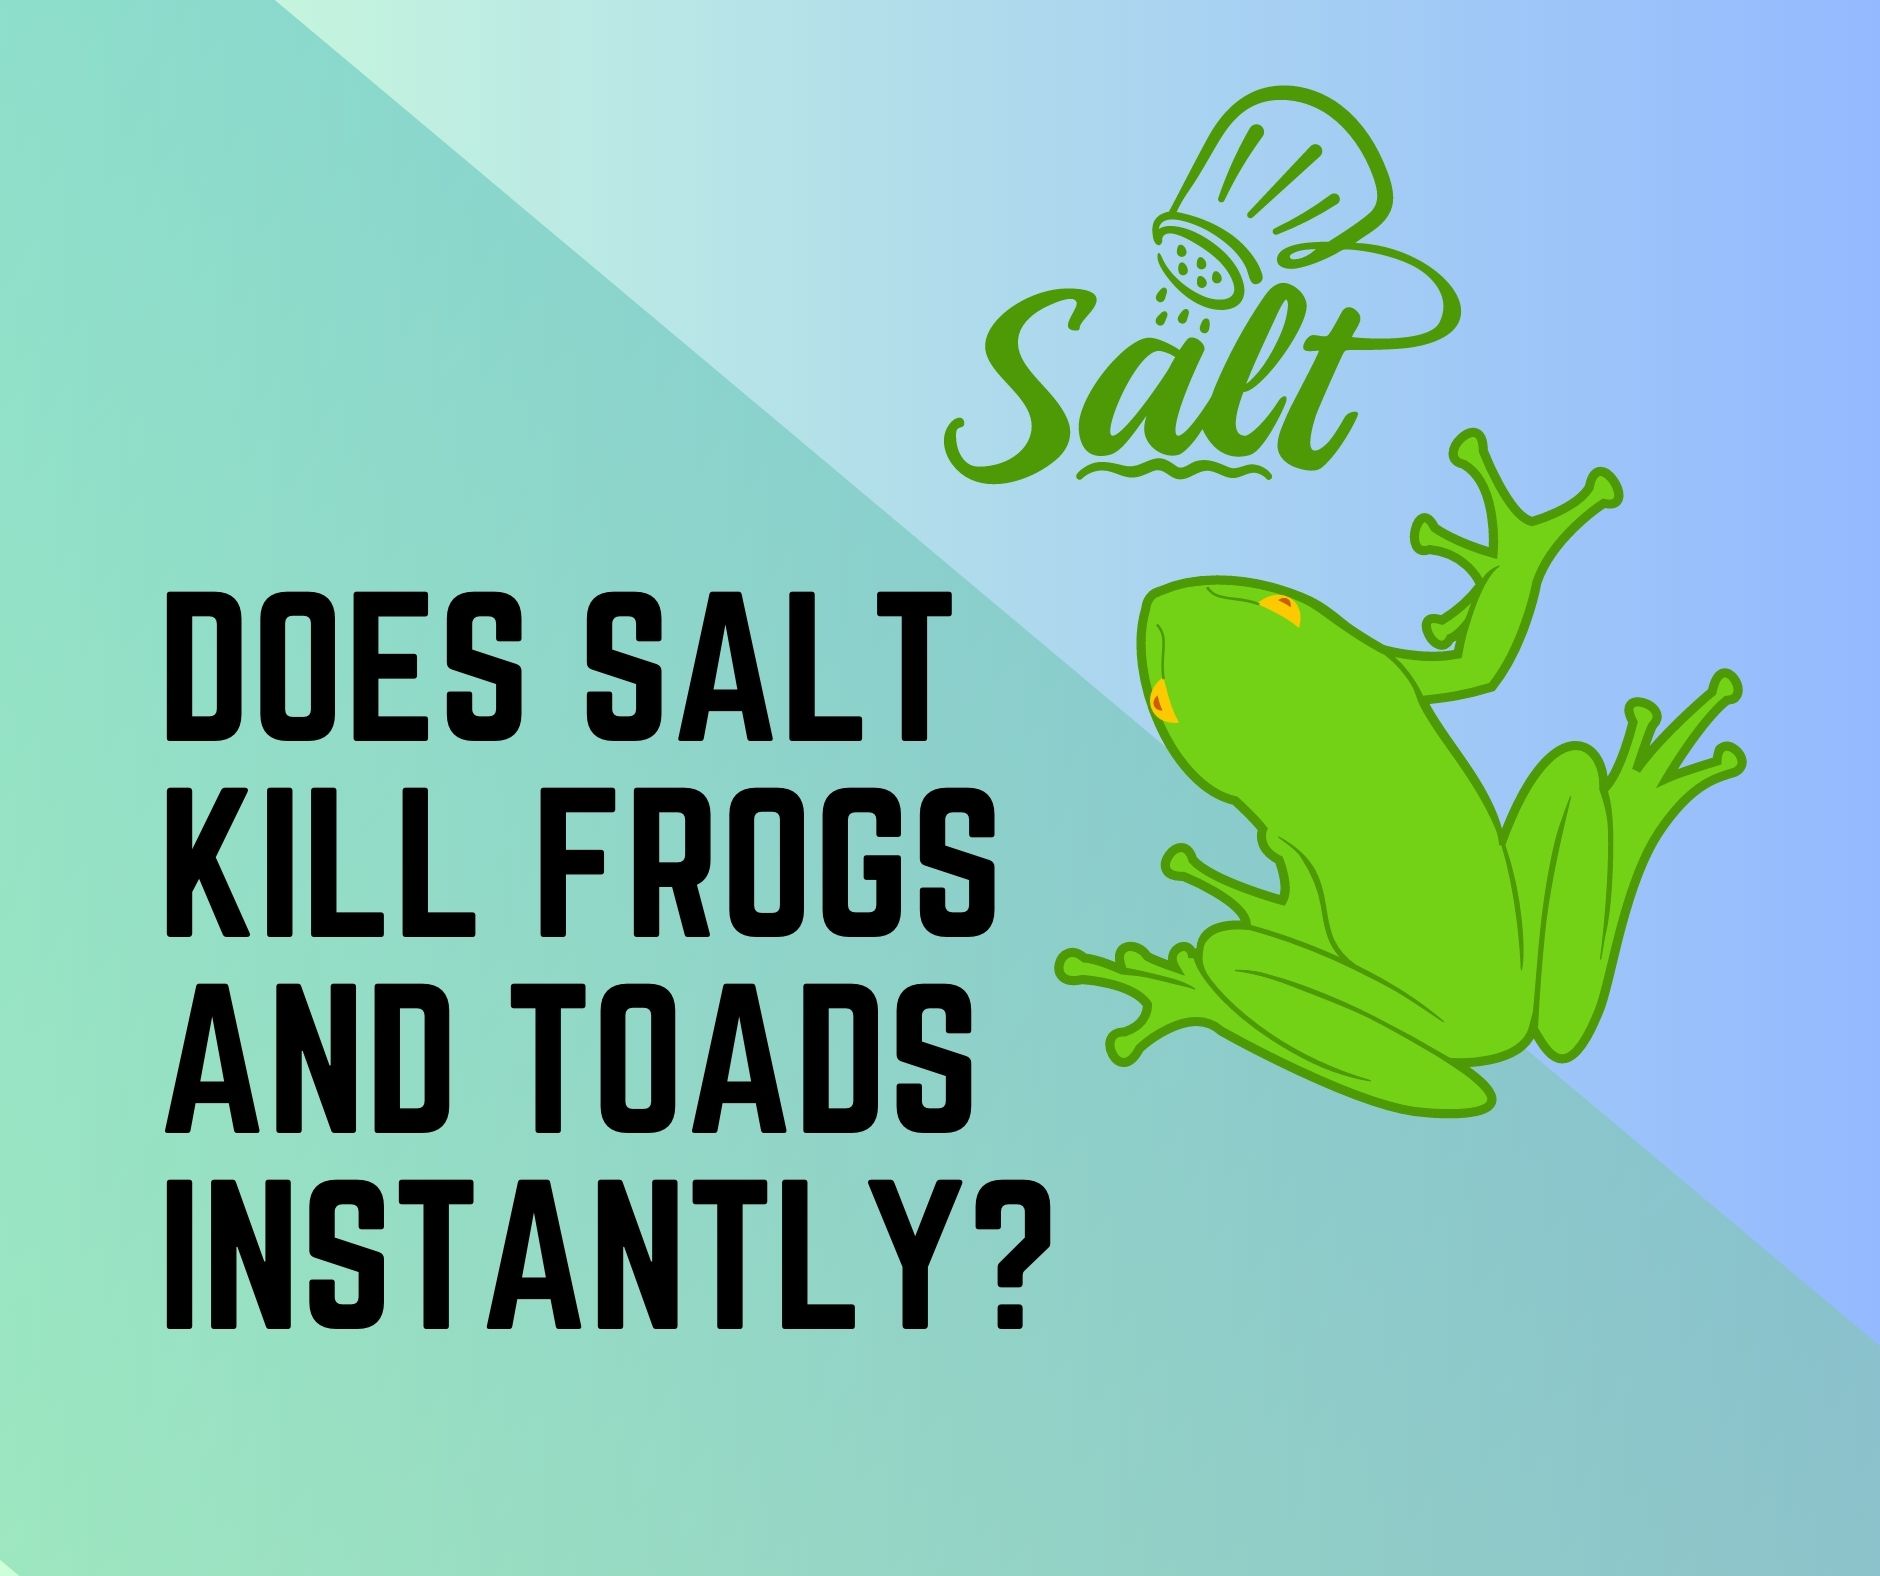 Does Salt Kill Frogs And Toads Instantly